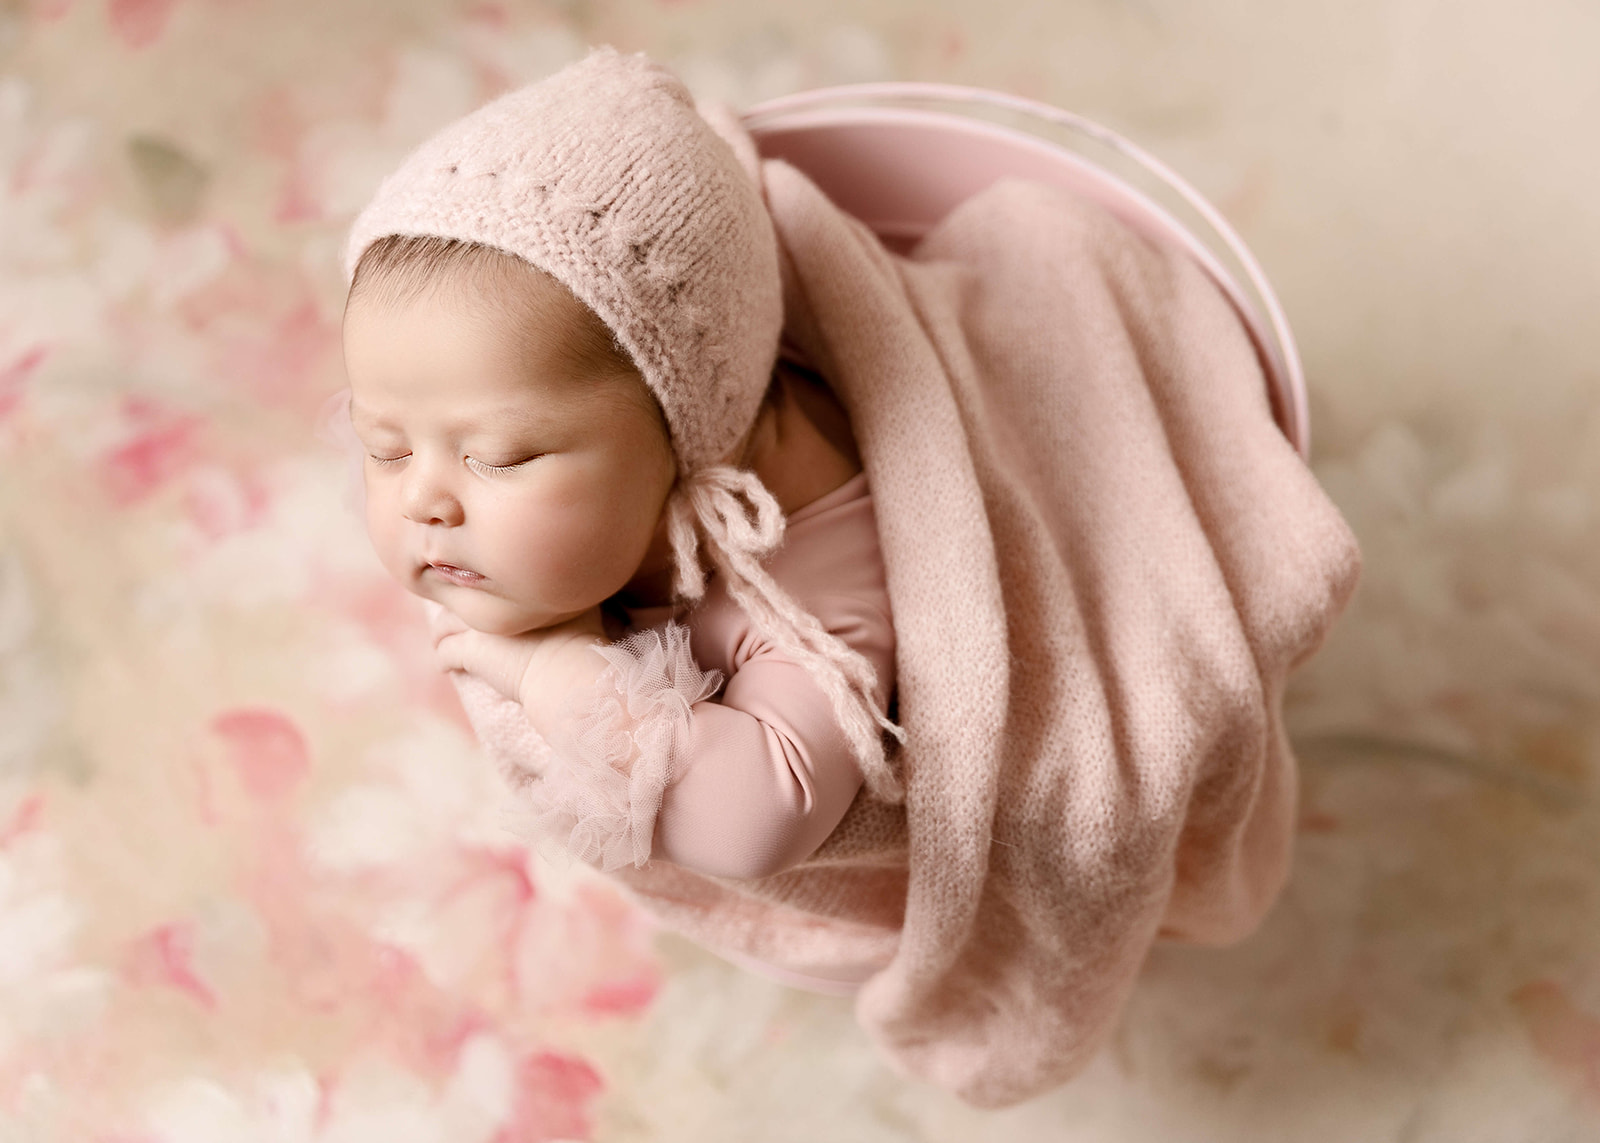 A newborn baby sleeps on her hands in a pink bucket with a blanket and knit hat